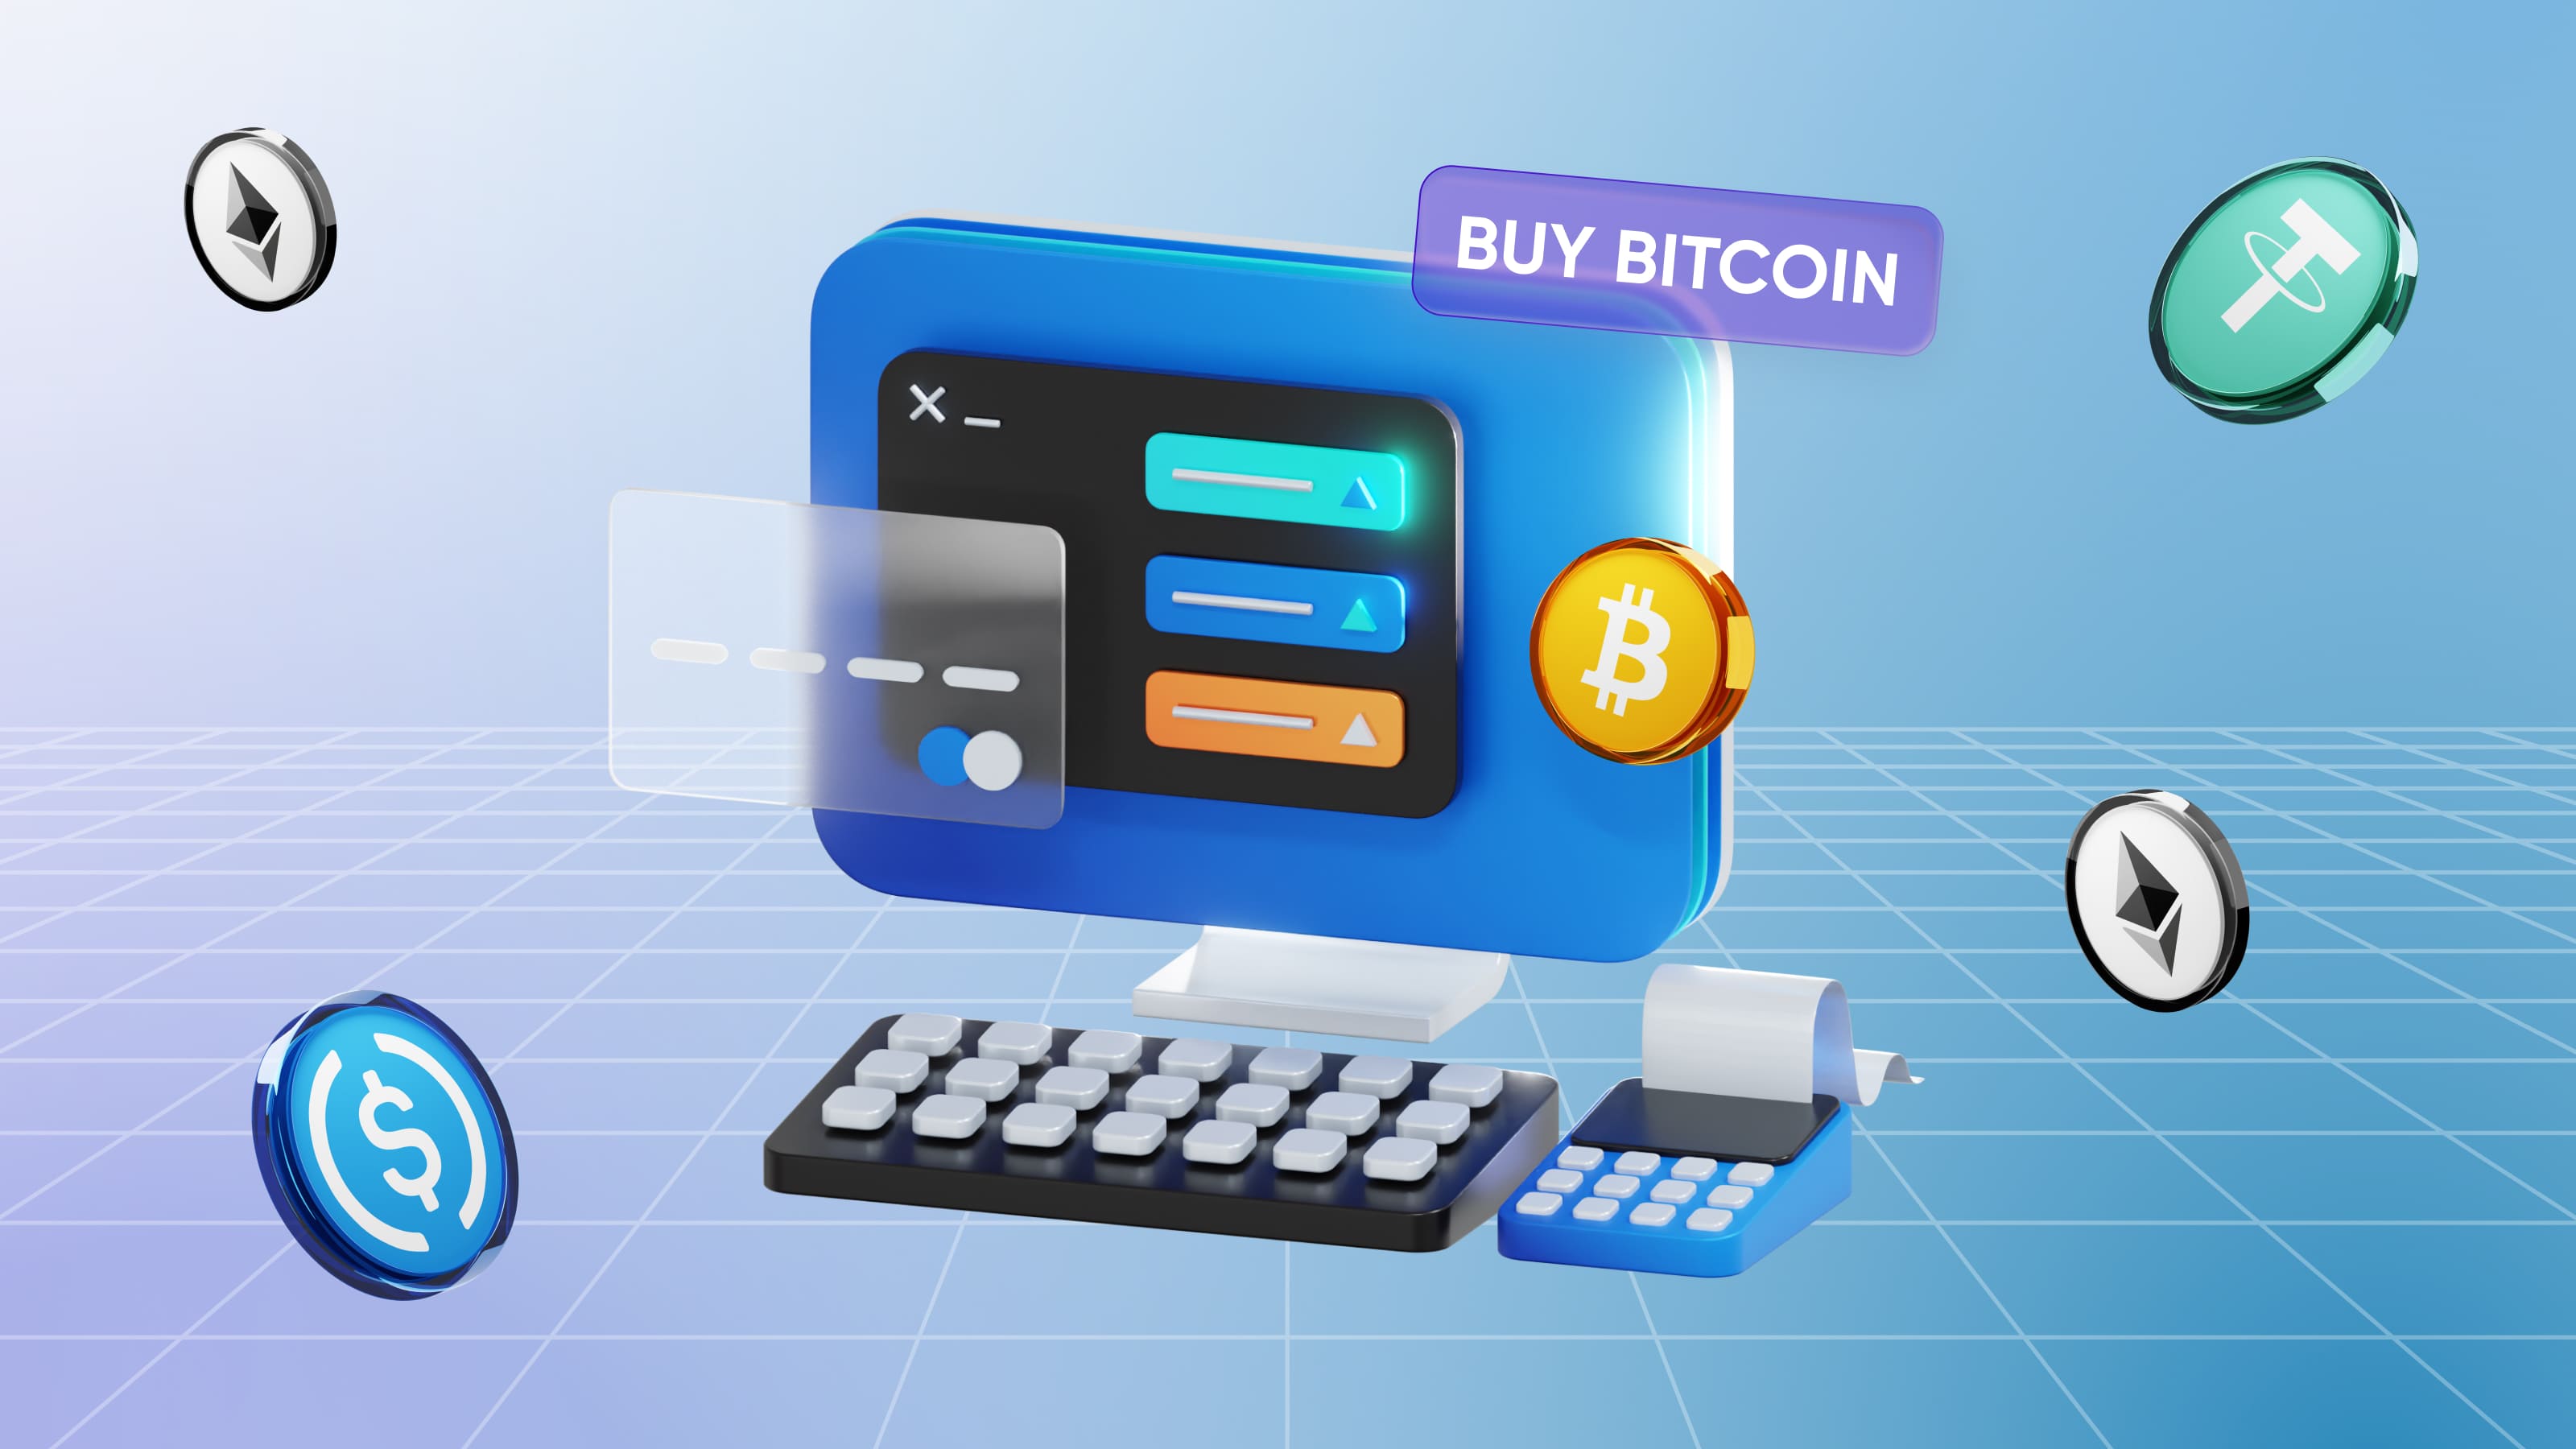 Buying cryptocurrency with a bank card is very popular among crypto investors.